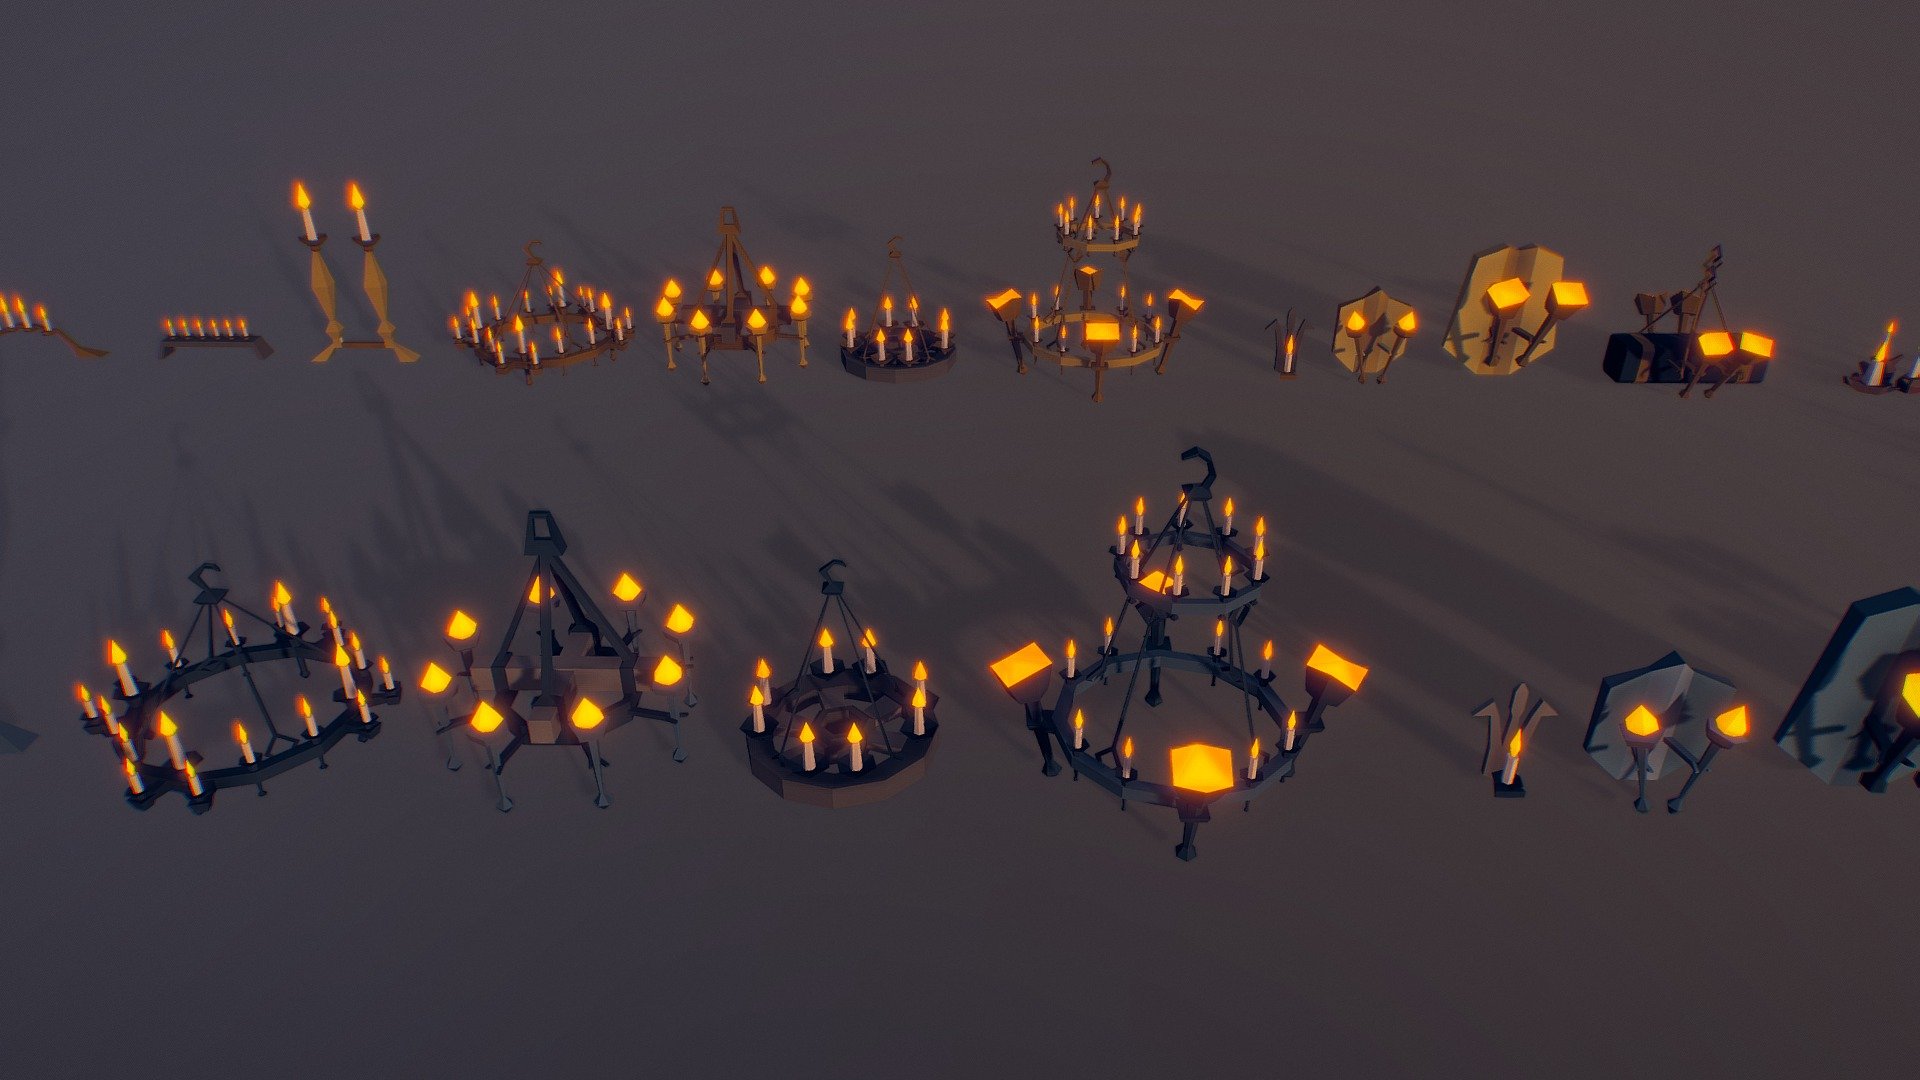 Chandeliers and Candles ( Low Poly )